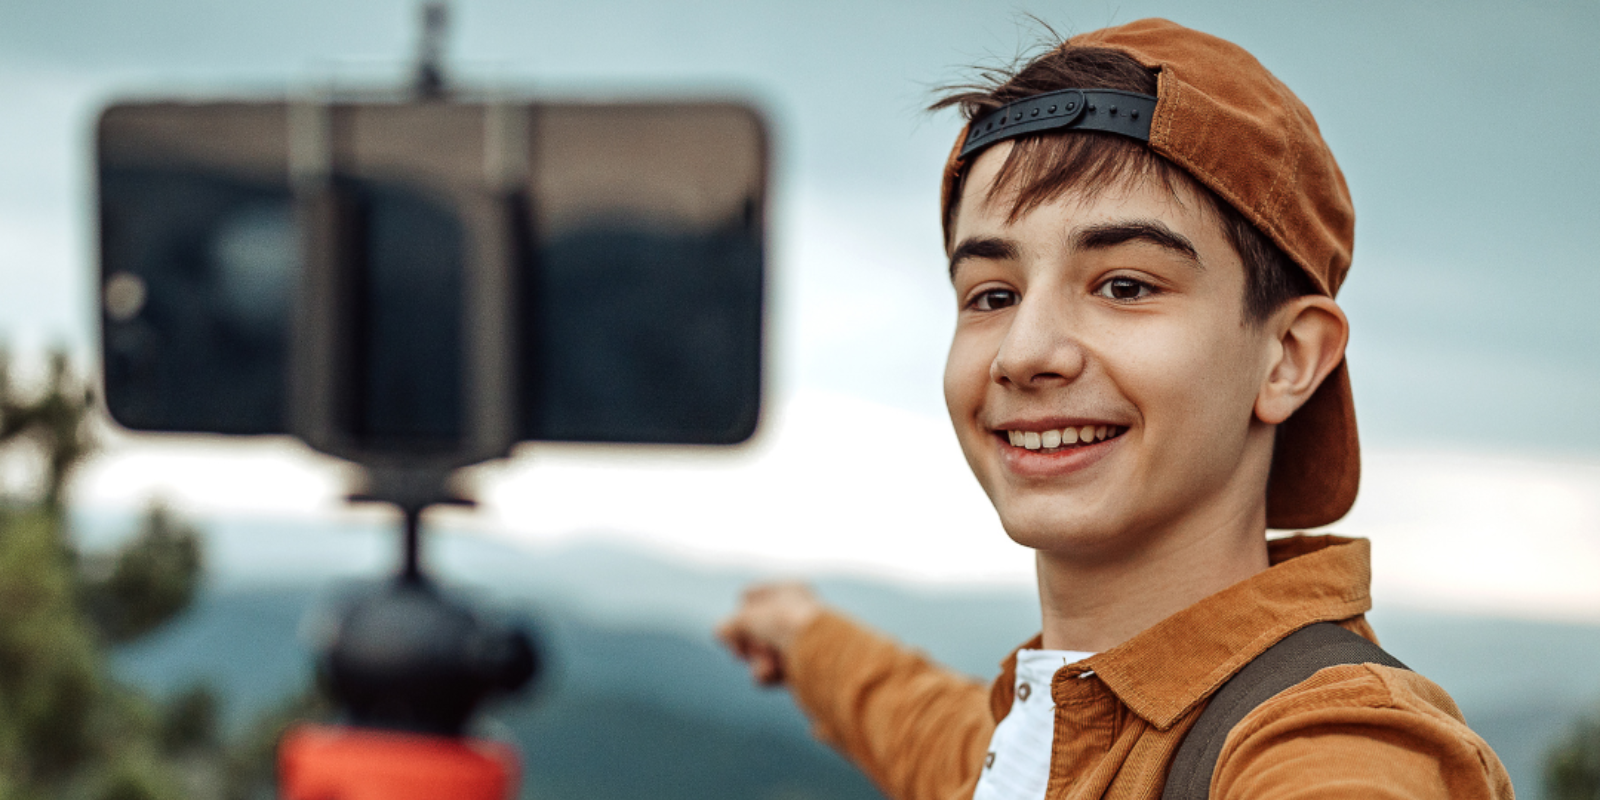 A young boy wearing a cap vlogs with a smartphone on a selfie stick, set against a mountainous backdrop.